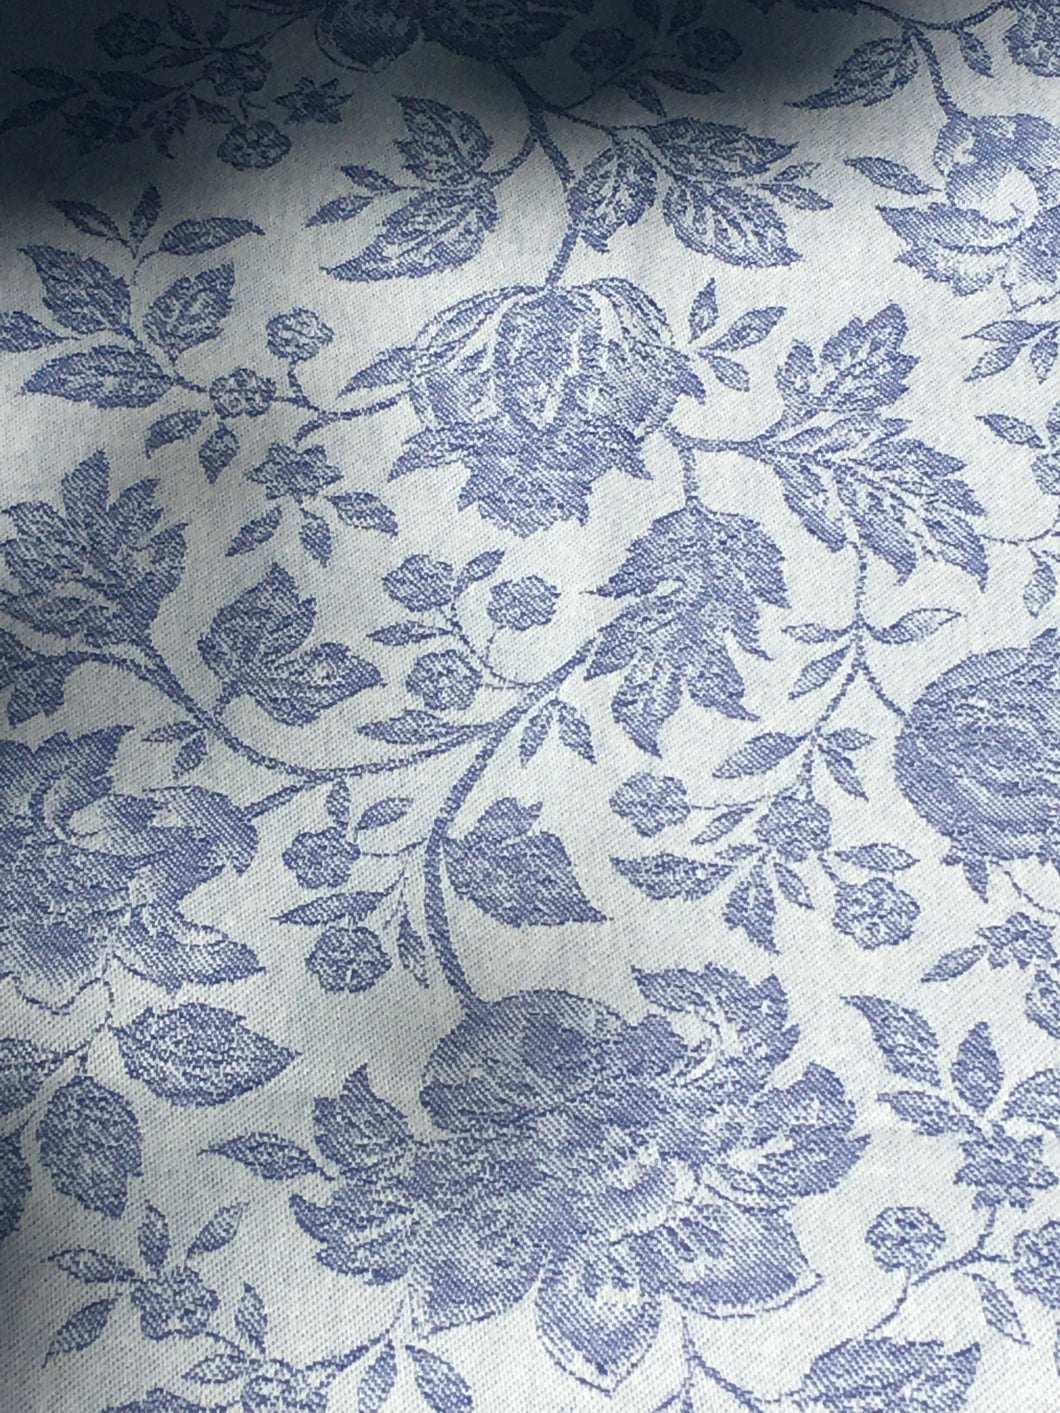 Anti-stain teflon treatment allows for liquids to bead off and universal wipe clean finish allows for liquids and oils to bead off. Measures 20.5 by 58 in. Pictured on a 72 inch length table for reference, but may be draped over the sides of a smaller table as well. Pictured in caprice blue featuring jacquard woven pomegranate-like baroque floral blooms and beautifully detailed leaves and bouquets of intertwined branching elaborated fleur de lys.